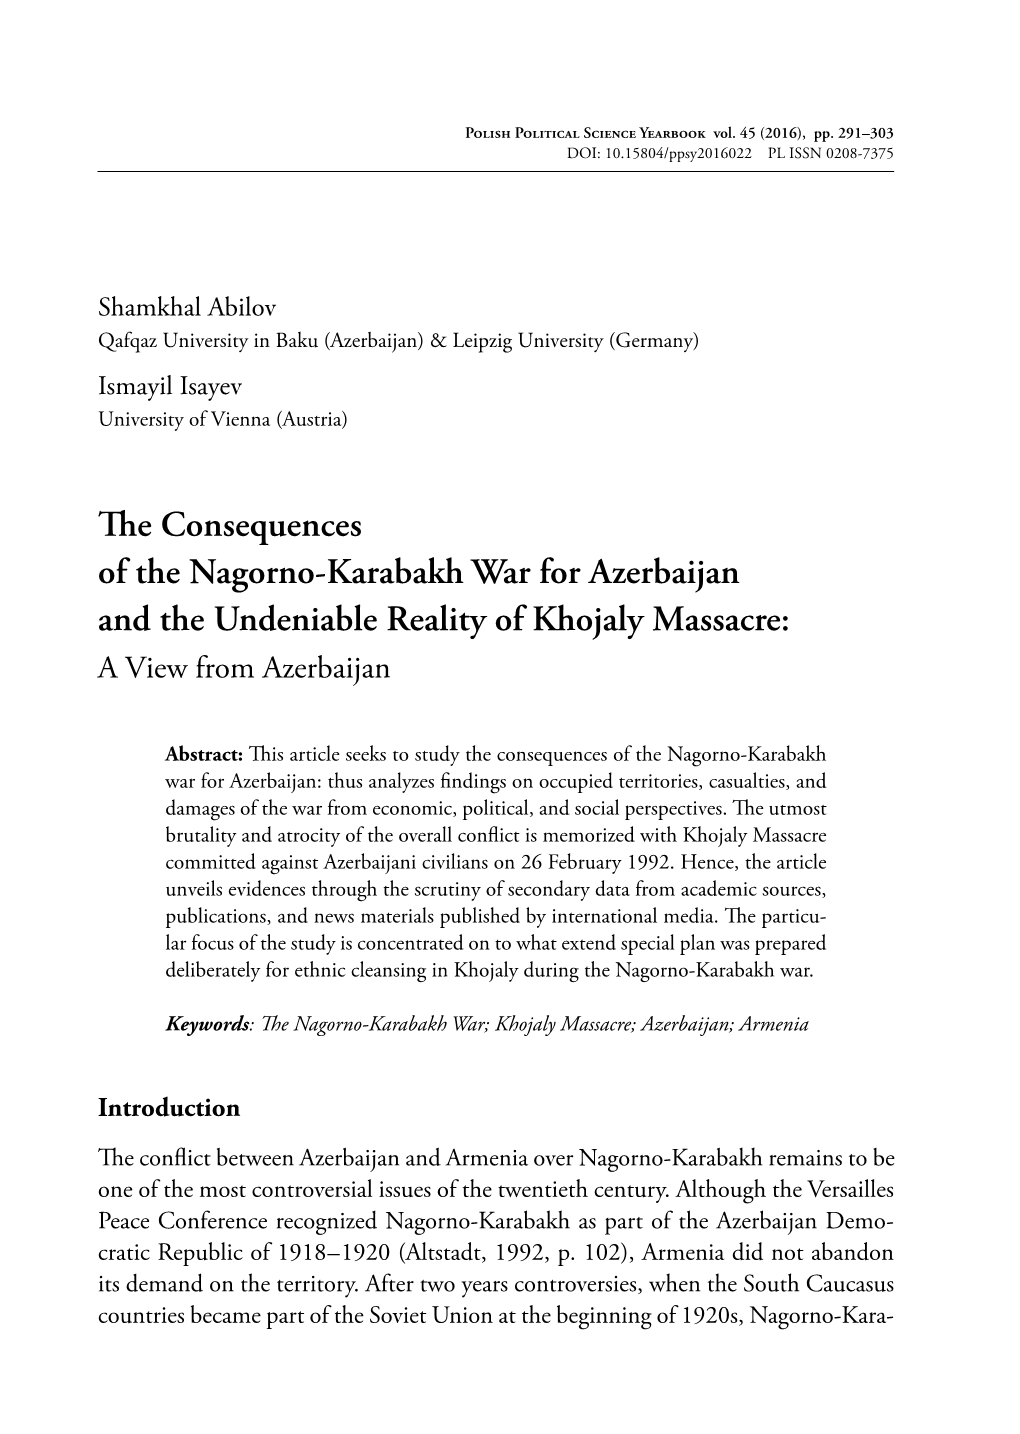 The Consequences of the Nagorno-Karabakh War for Azerbaijan and the Undeniable Reality of Khojaly Massacre: a View from Azerbaijan